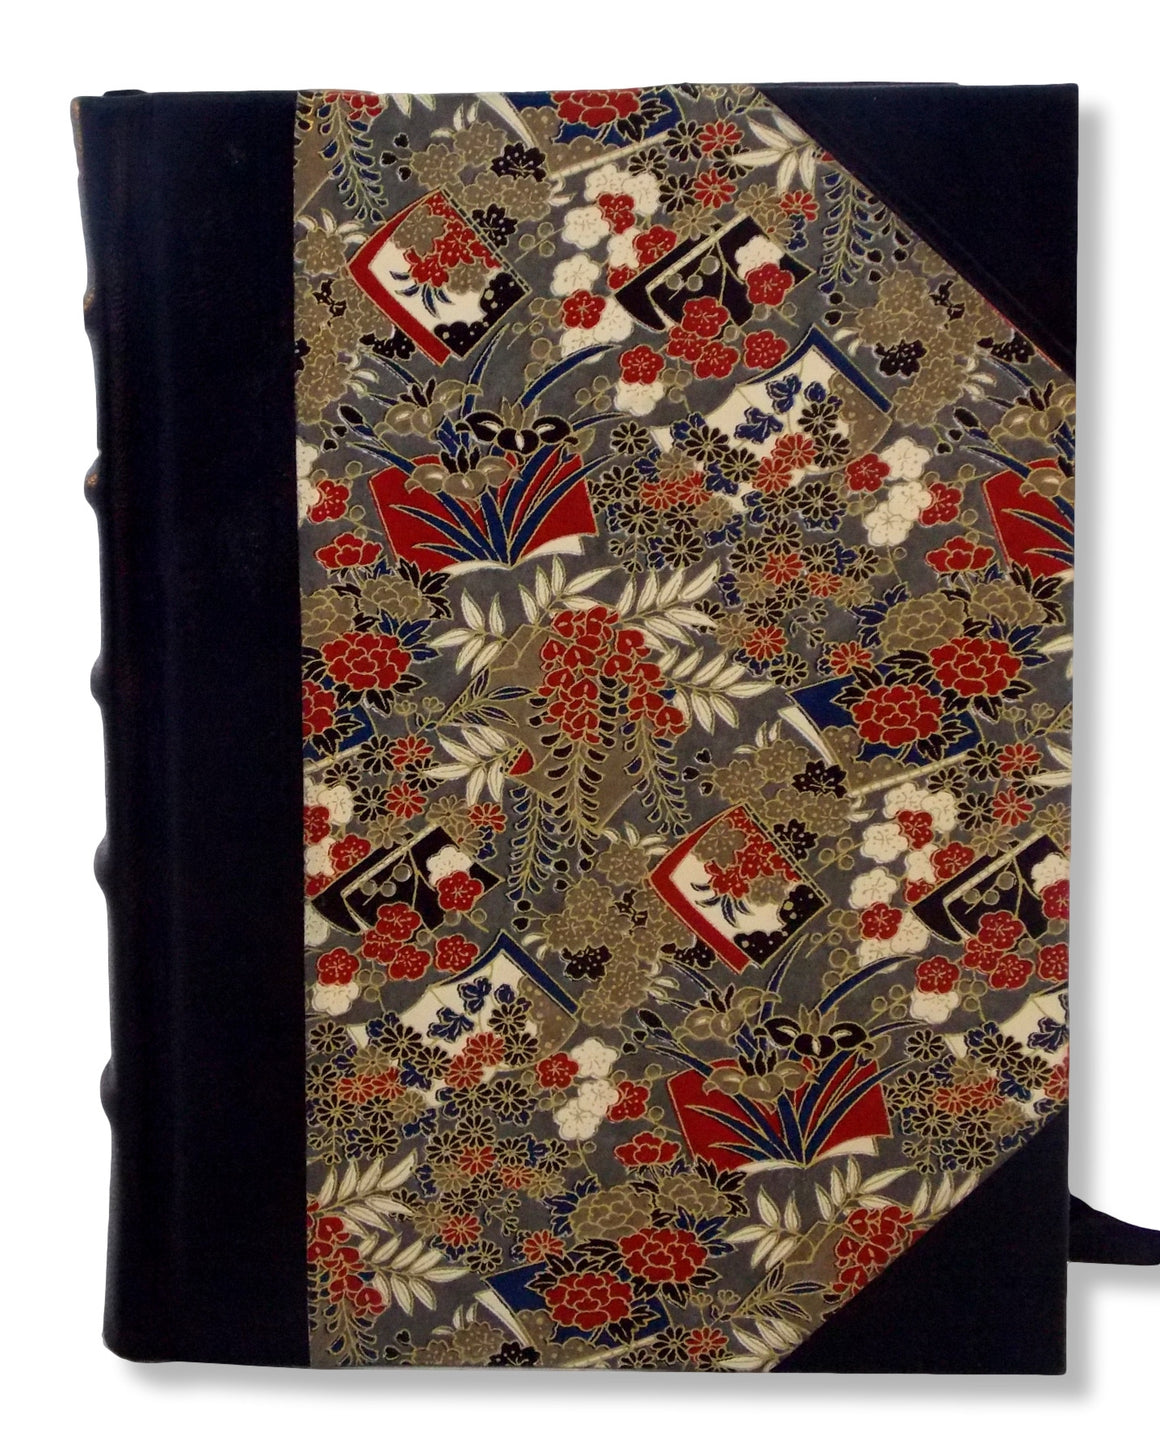 Black leather half journal featuring Japanese washi printed sides